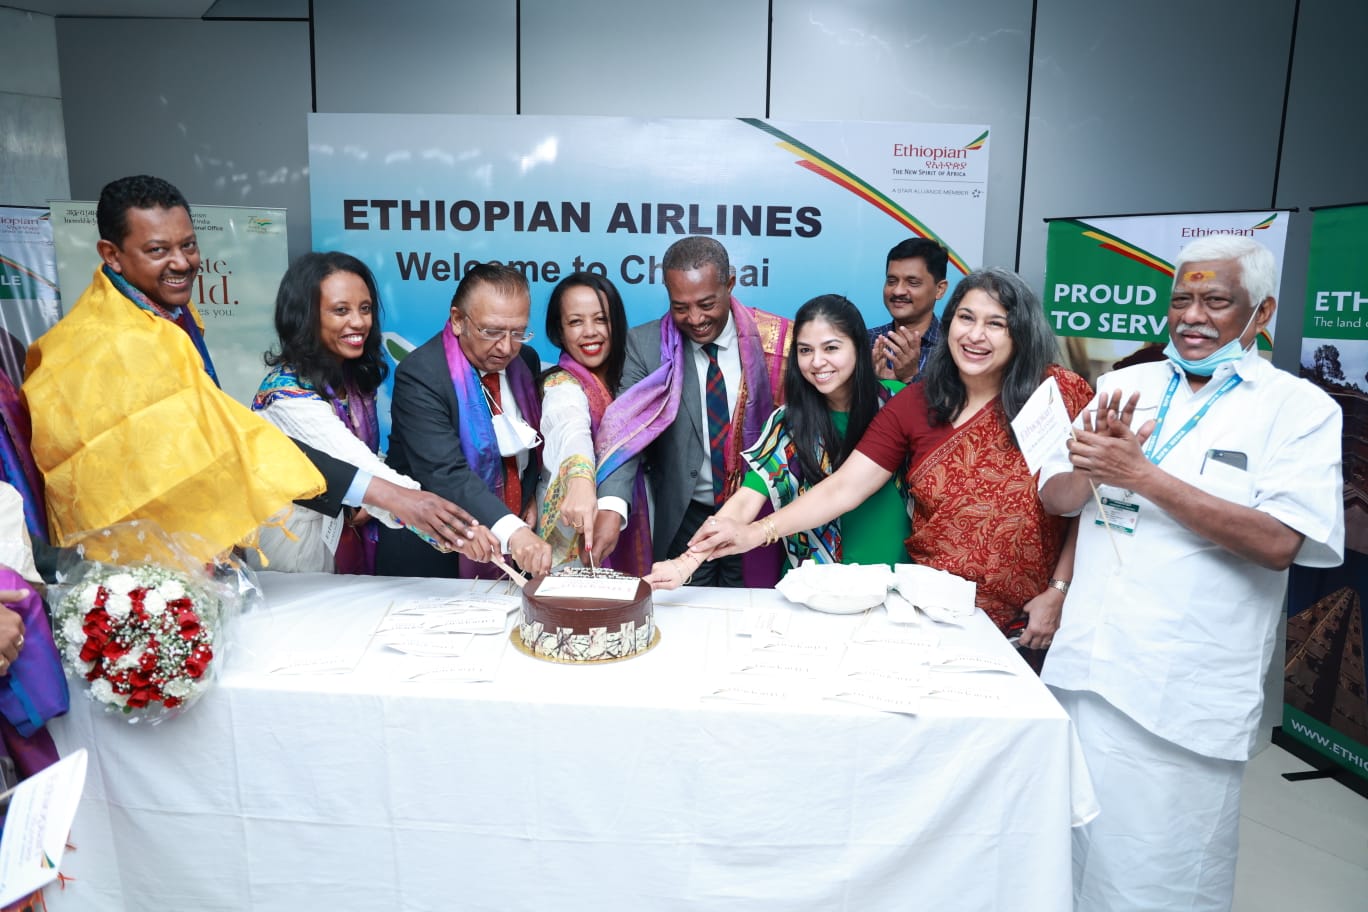 Ethiopian Airlines started flights to Chennai from Addis Ababa